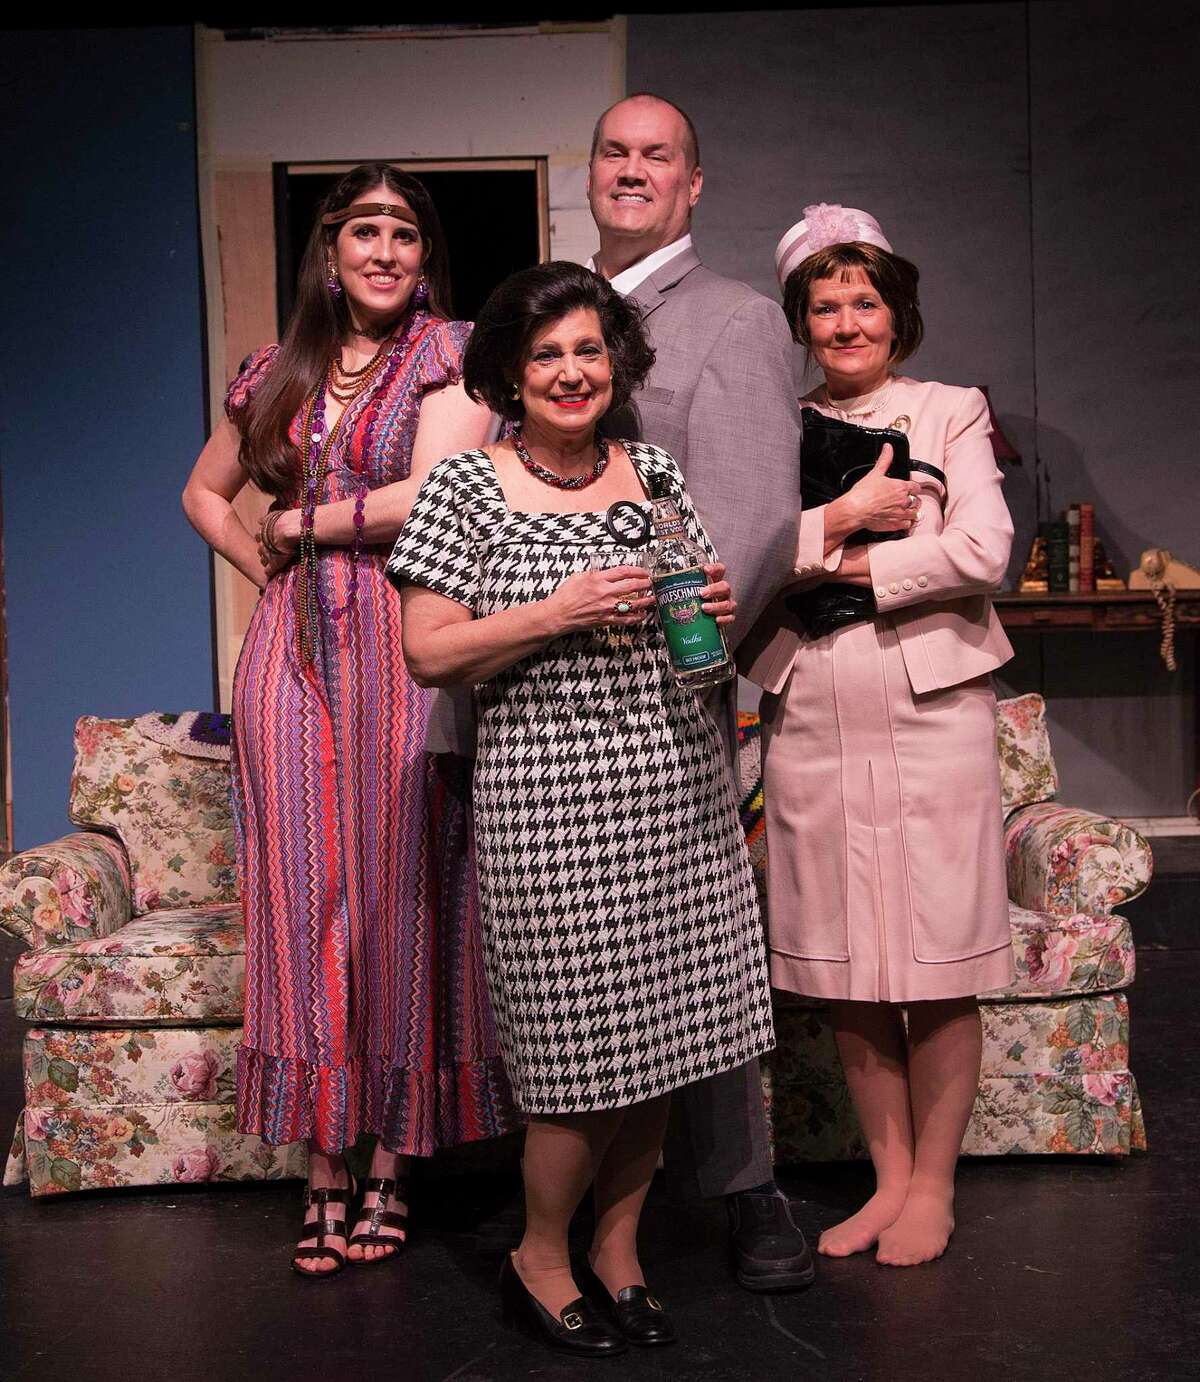 The cast of The Players Theatre Company's "Last of the Red Hot Lovers." Back is Michael Raabe as Barney, ladies from left are Amanda Abright as Bobbi, Donna Gylling as Elaine and Cindy Siple as Jeanette. The show opens on Jan. 22 at the Owen Theatre.